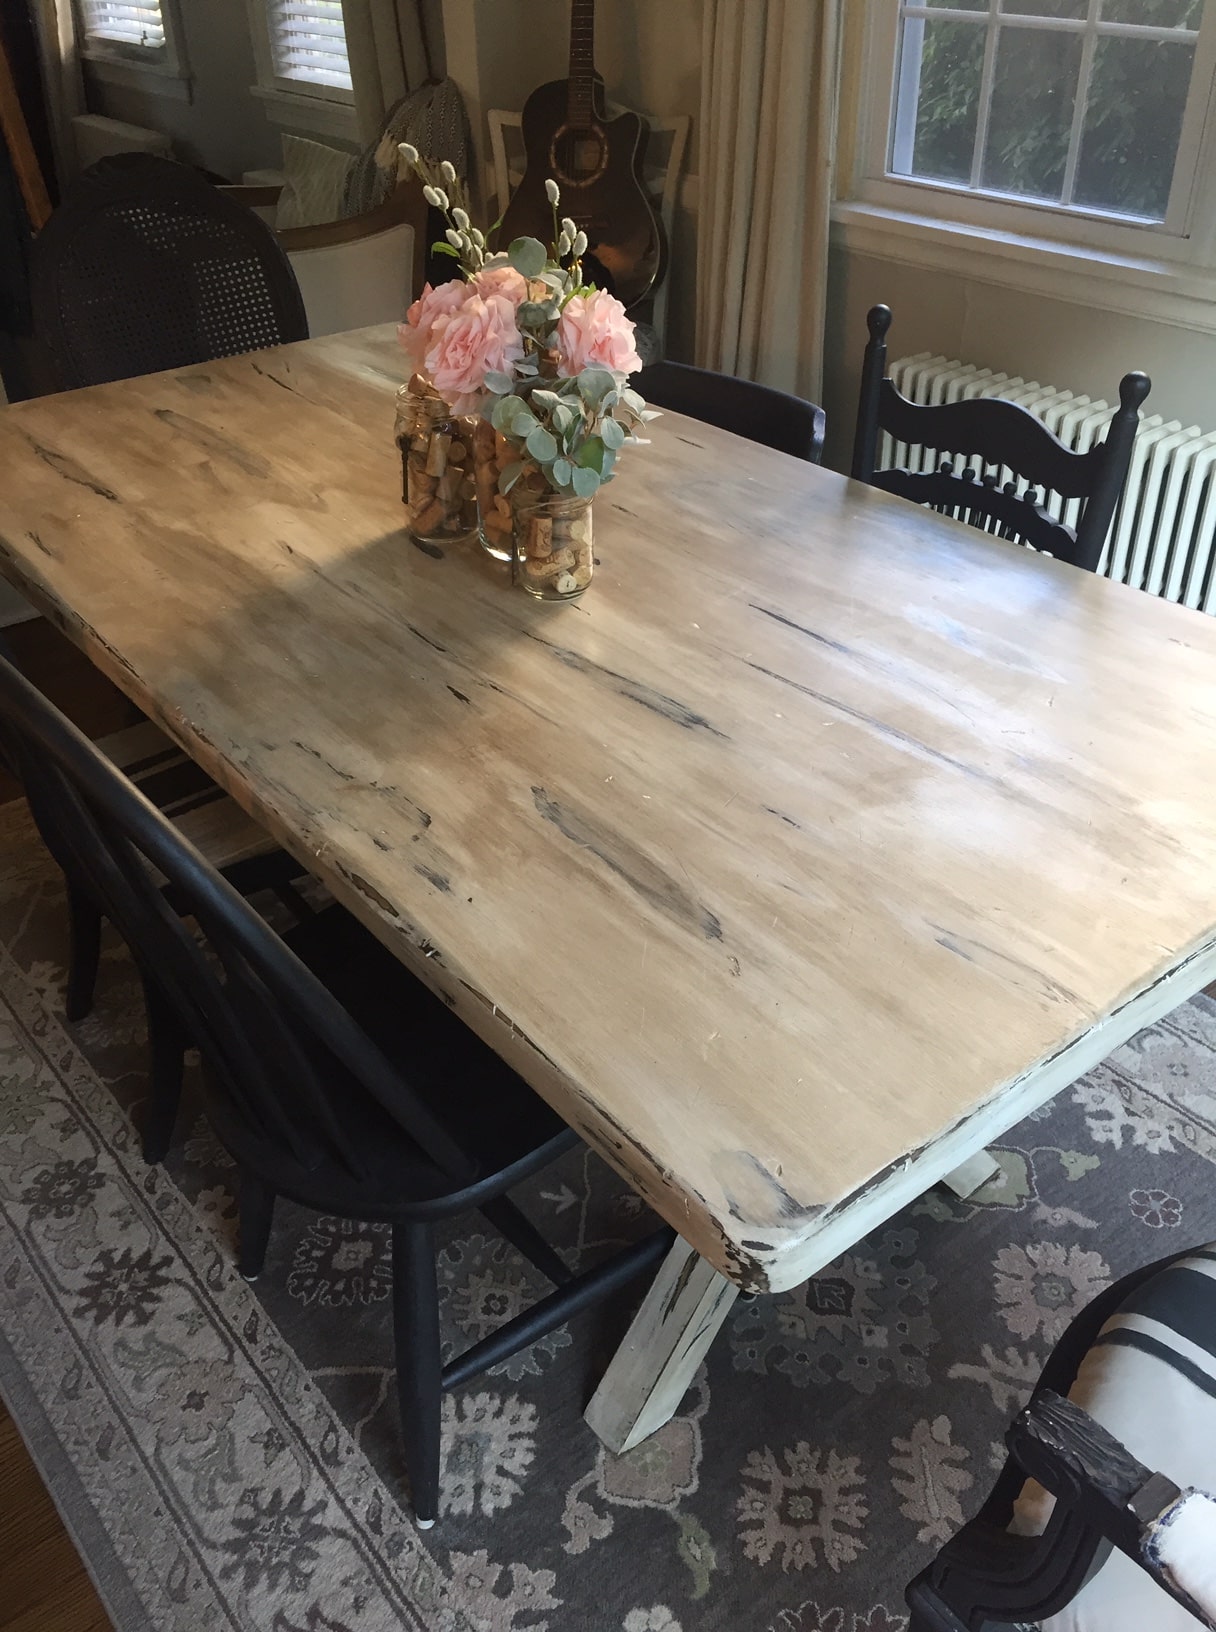 Chalk Paint Dining Room Table – Is it a Good Idea? - West Magnolia Charm